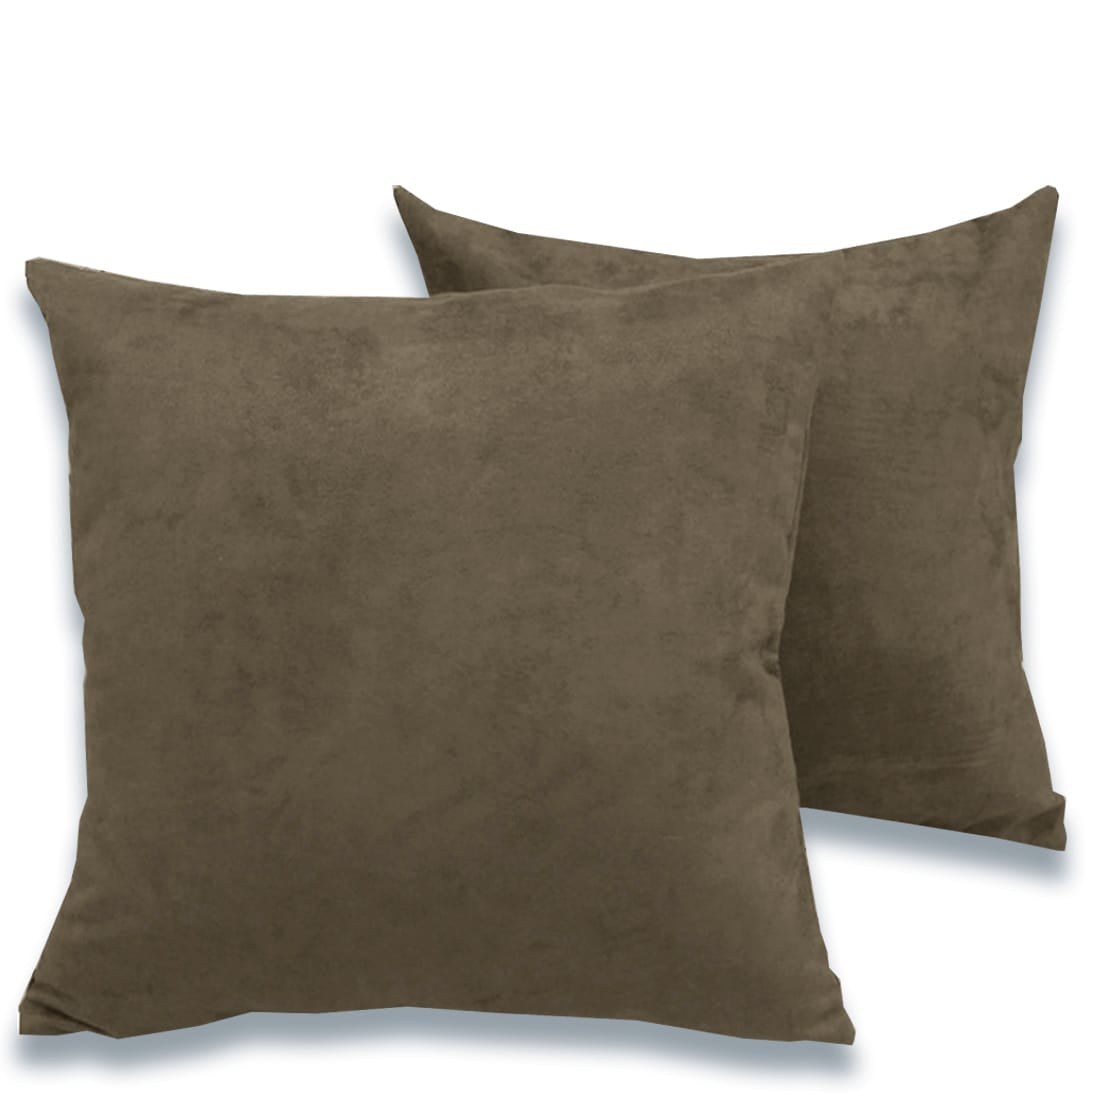 Luxurious Microfiber Suede Velvet Cushion Cover Set in Storm Brown online in India